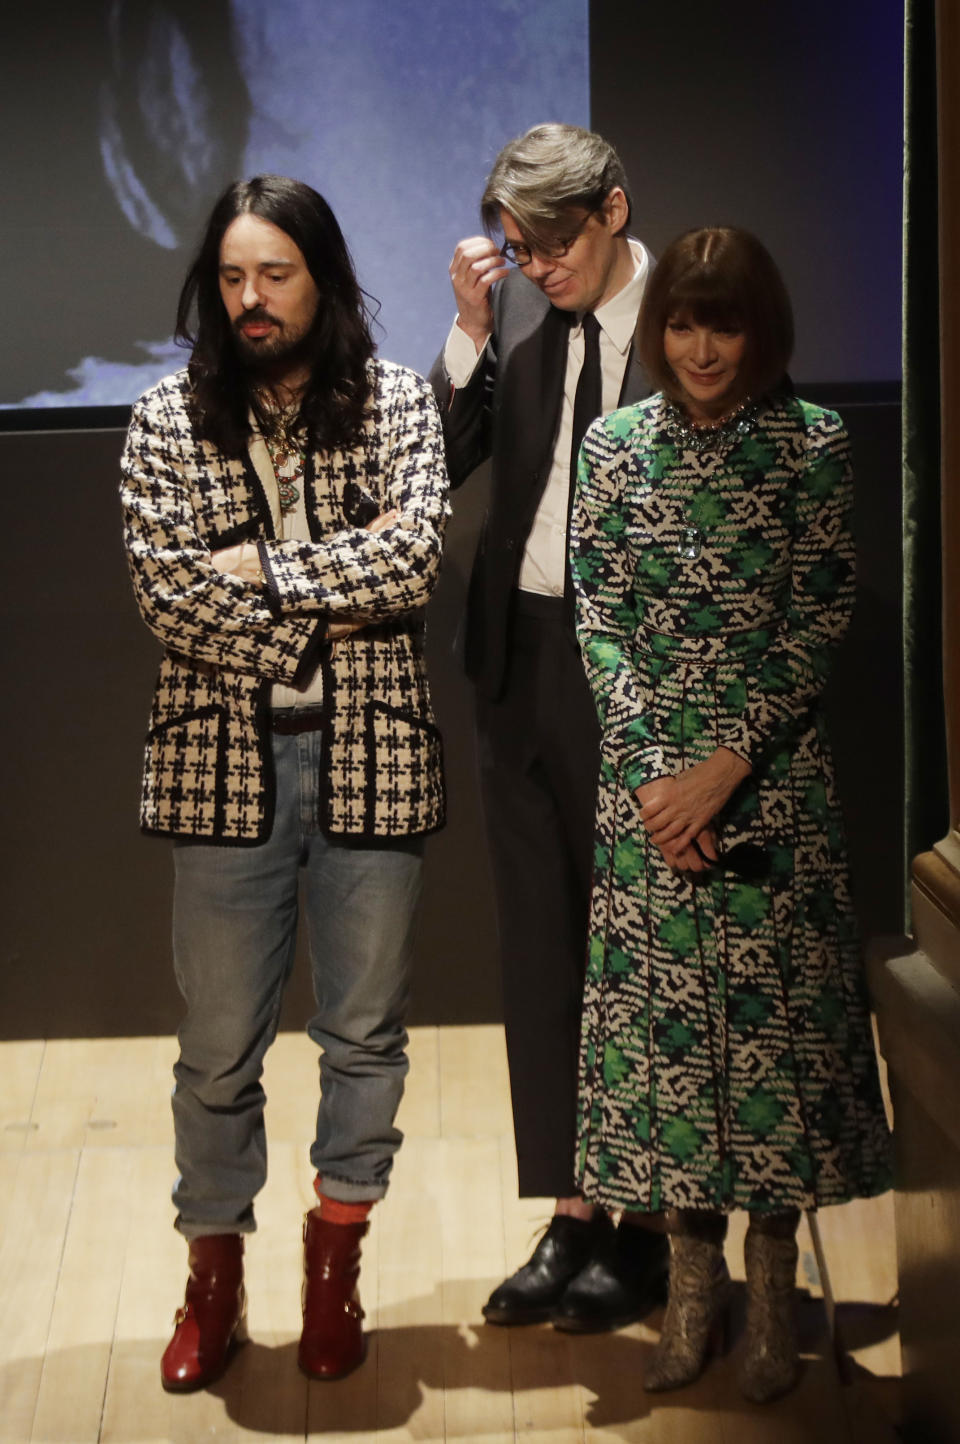 American Vogue editor-in-chief Anna Wintour, right, Gucci creative director Alessandro Michele, left, and curator Andrew Bolton stand during the presentation of this year's Costume Institute exhibition titled ''Camp: Notes on Fashion,'' at the Teatro Gerolamo, in Milan, Italy, Friday, Feb. 22, 2019. The exhibition will be shown at the Metropolitan Museum of Art of New York, from May 9-Sept. 8, 2019. (AP Photo/Luca Bruno)